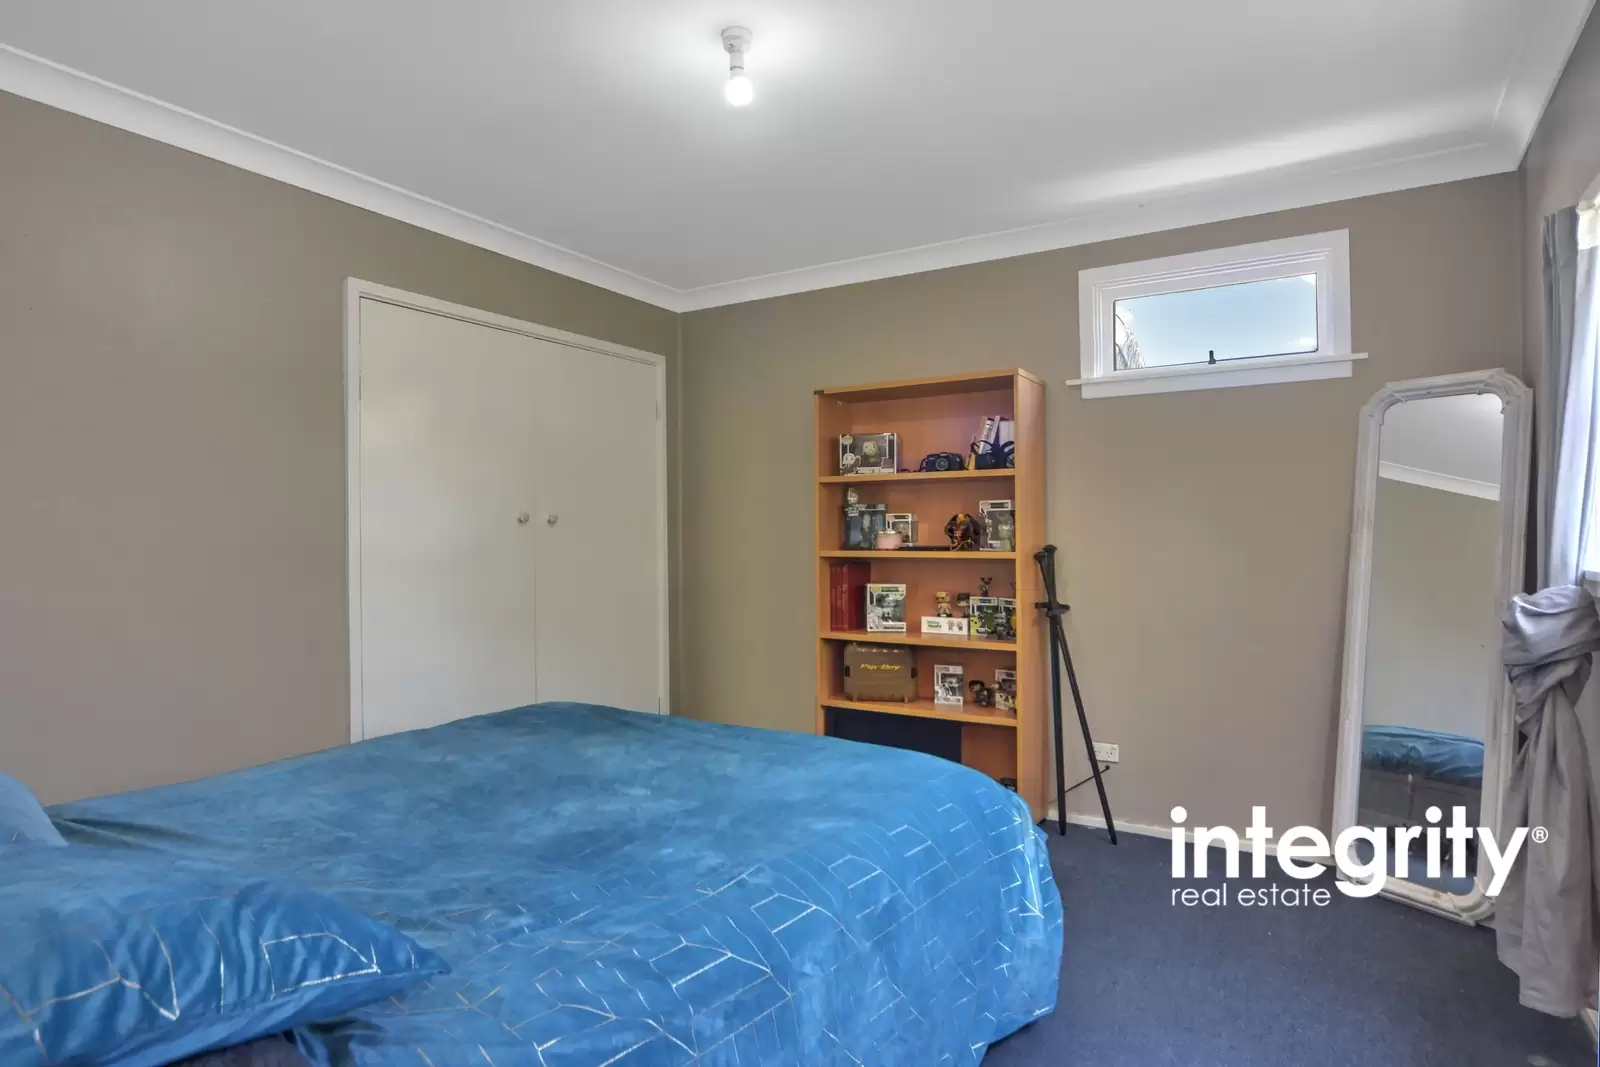 2/172 Mckay Street, Nowra Sold by Integrity Real Estate - image 4